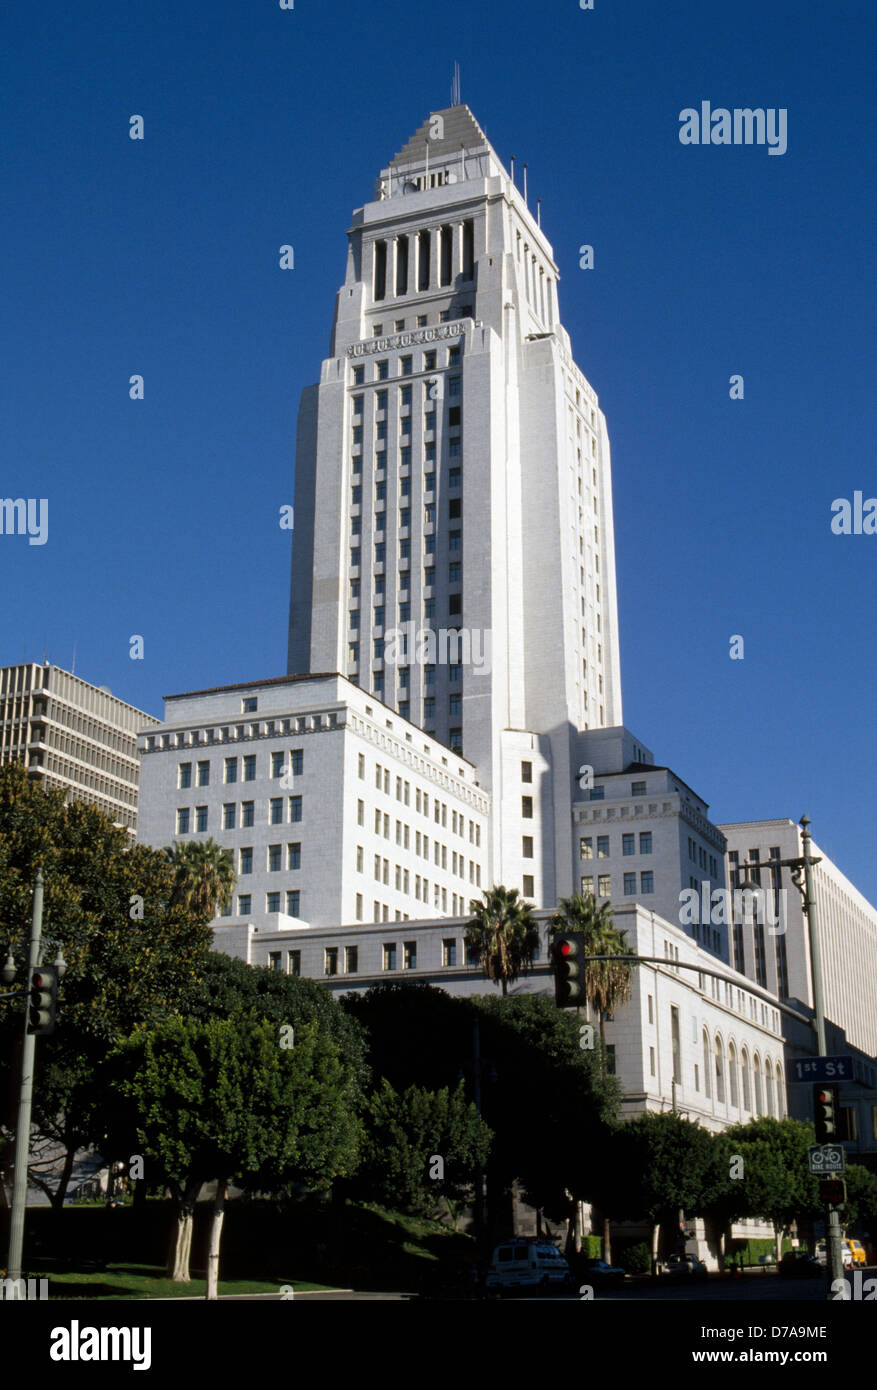 The iconic 1928 Los Angeles City Hall with its pyramid top rises in the Civic Center district of downtown Los Angeles in Southern California, USA. Stock Photo